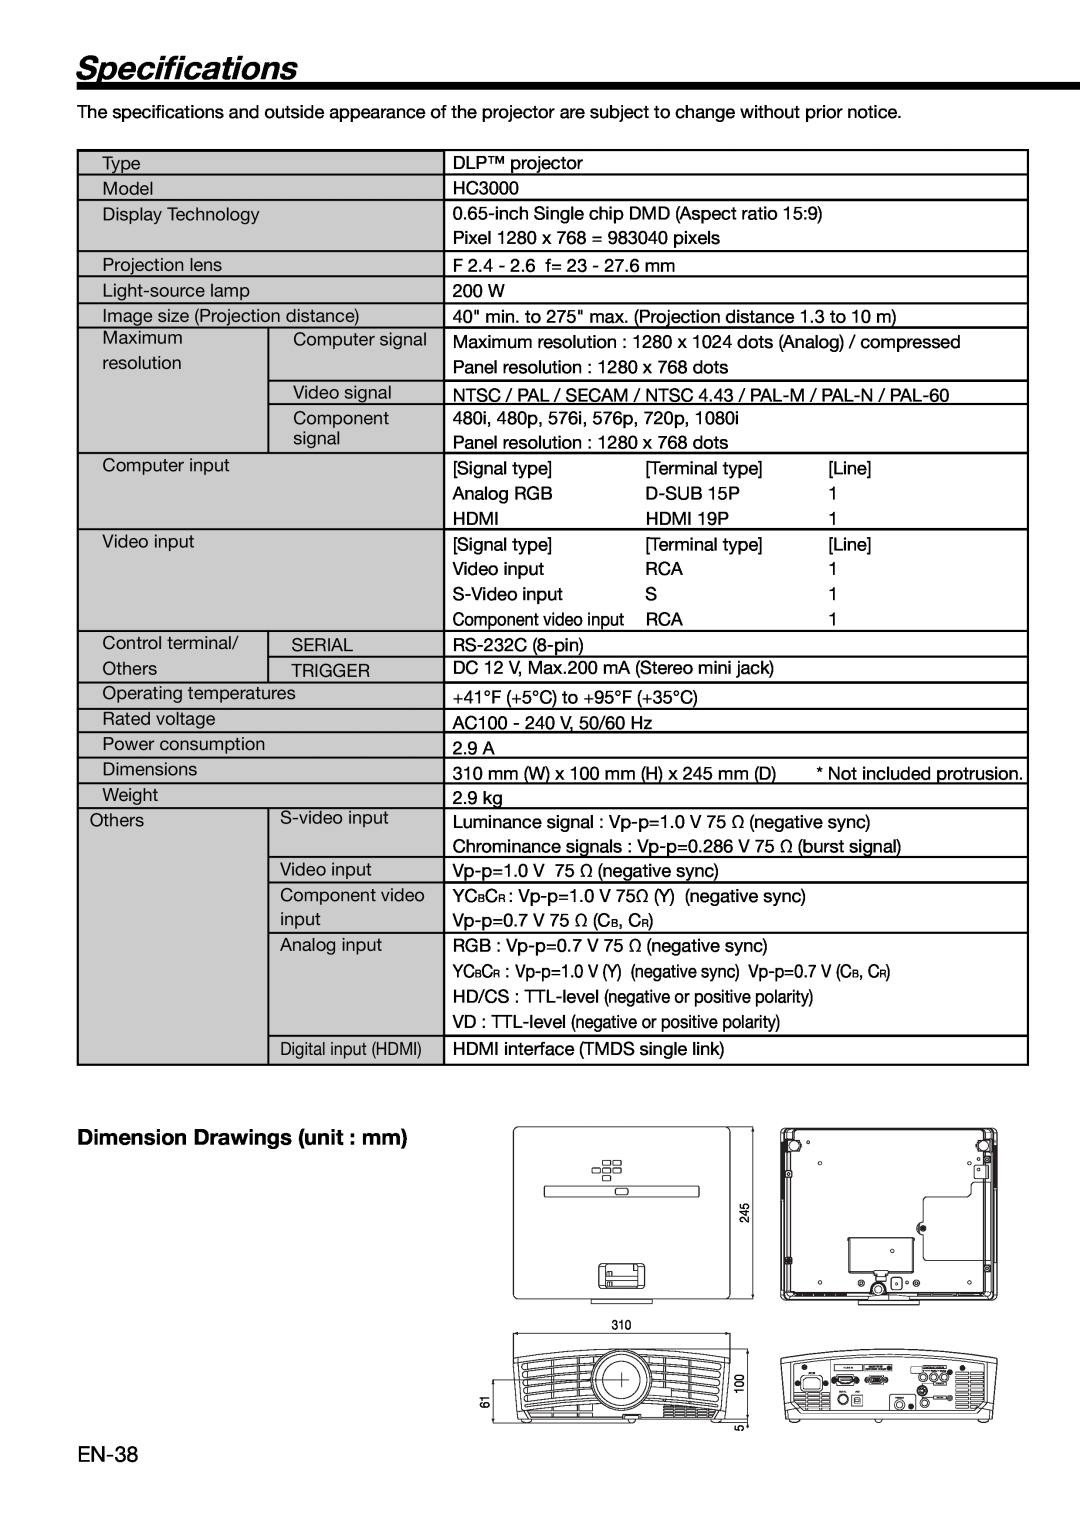 Mitsubishi Electronics HC3000 user manual Speciﬁcations, Dimension Drawings unit mm 